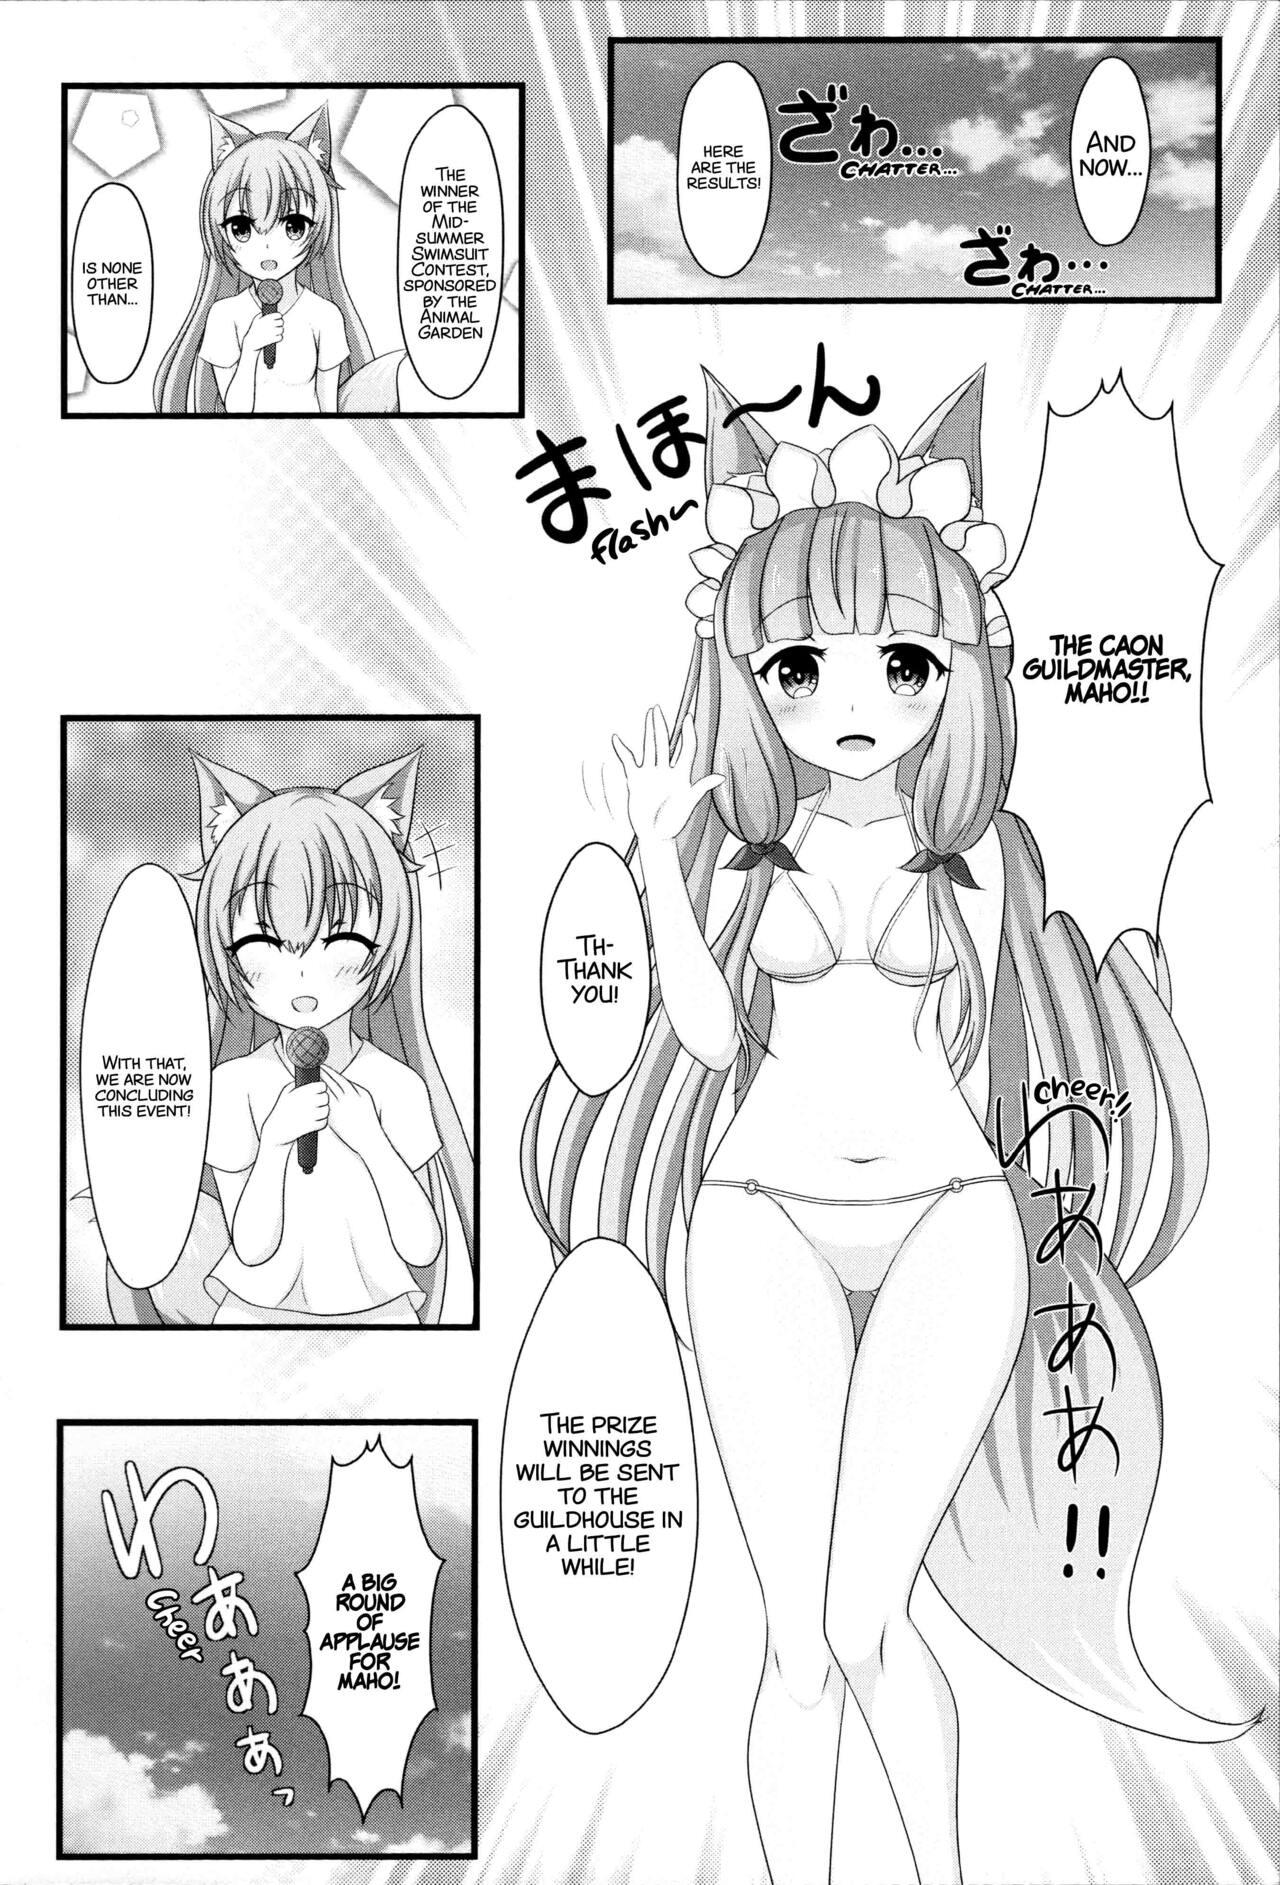 Nude Maho Hime Connect! 2 - Princess connect 1080p - Page 5